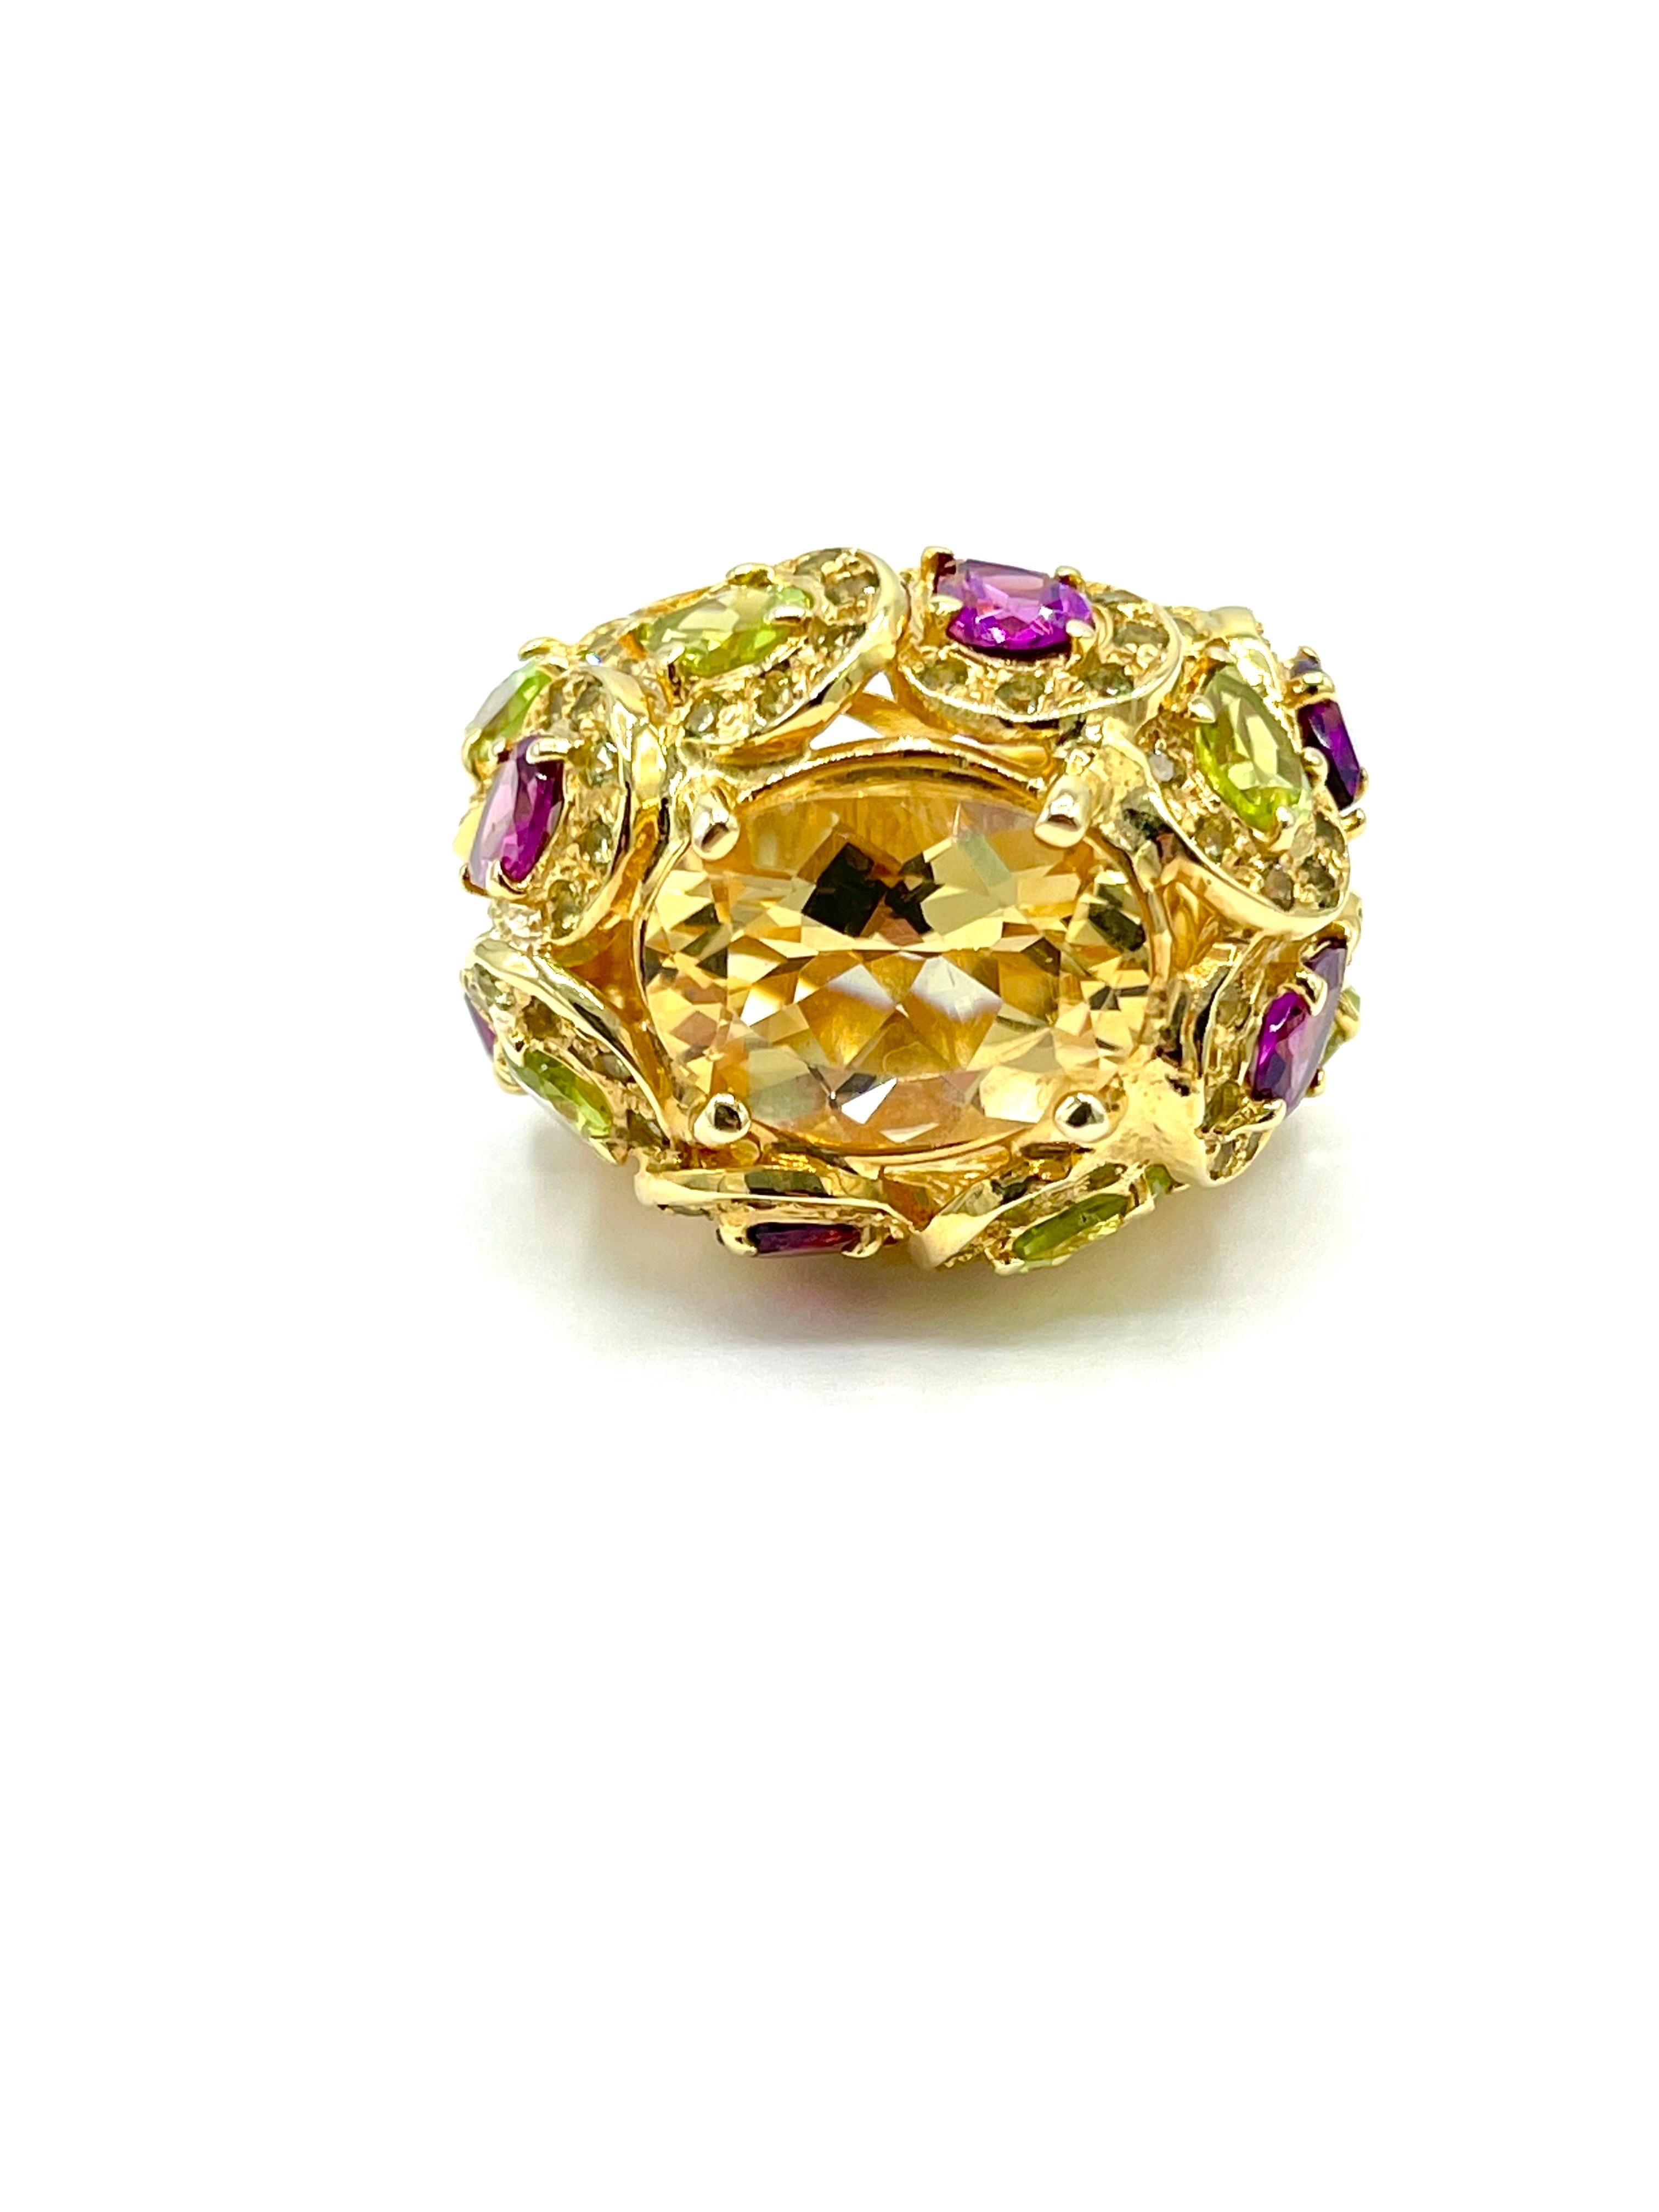 A great fashion ring to wear around town!  The 3.68 carat Citrine is prong set, atop a pear shape gold leaf design set with Diamonds surrounding pear shape Peridot and Garnets in 14k yellow gold.  The ring is currently a size 8.00, and can be